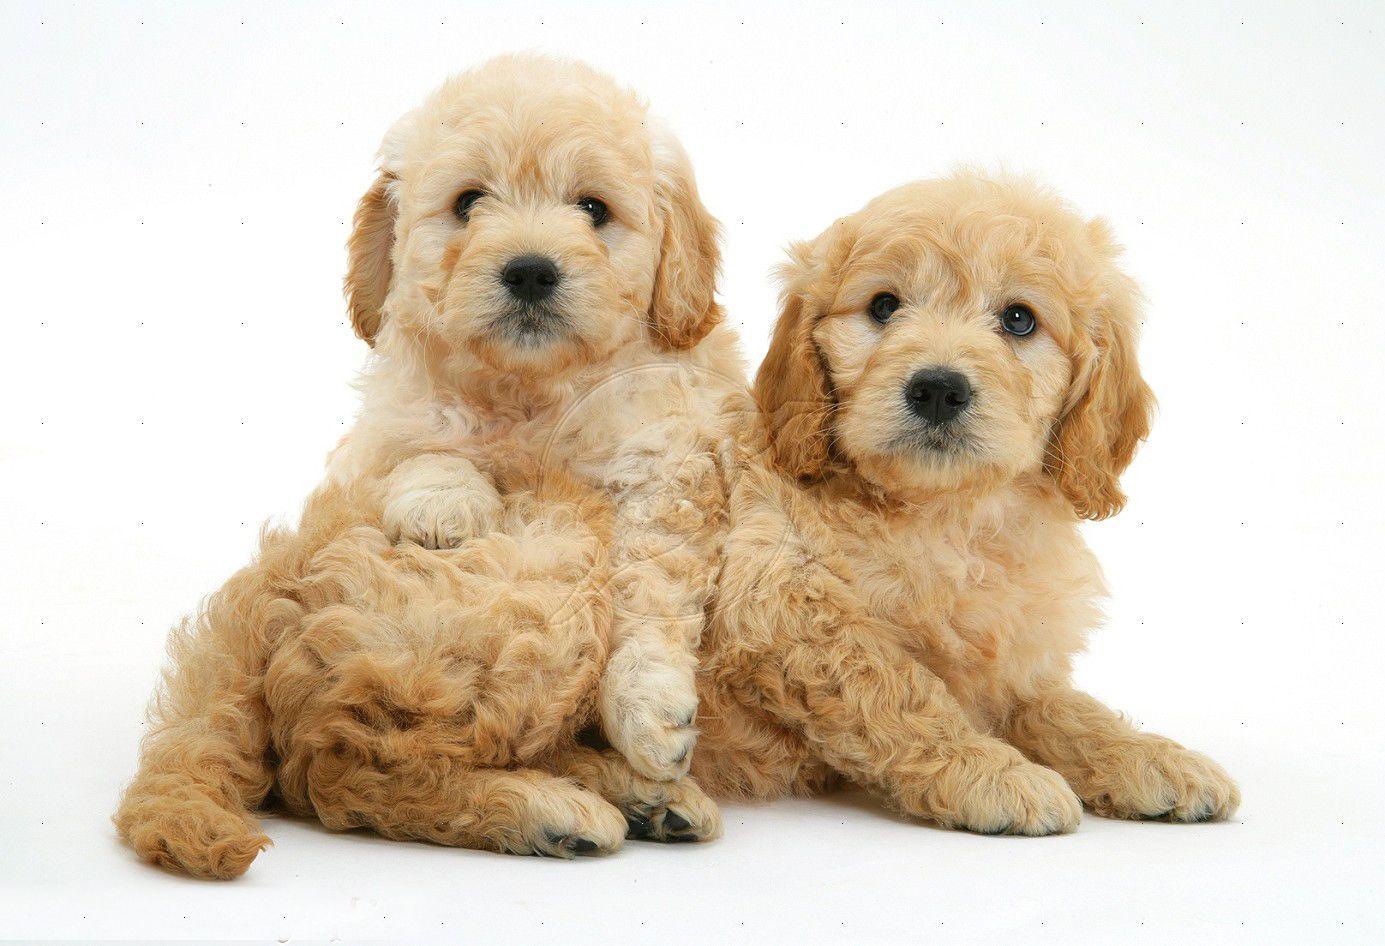 goldendoodle wallpapers wallpaper cave on goldendoodle puppies wallpapers